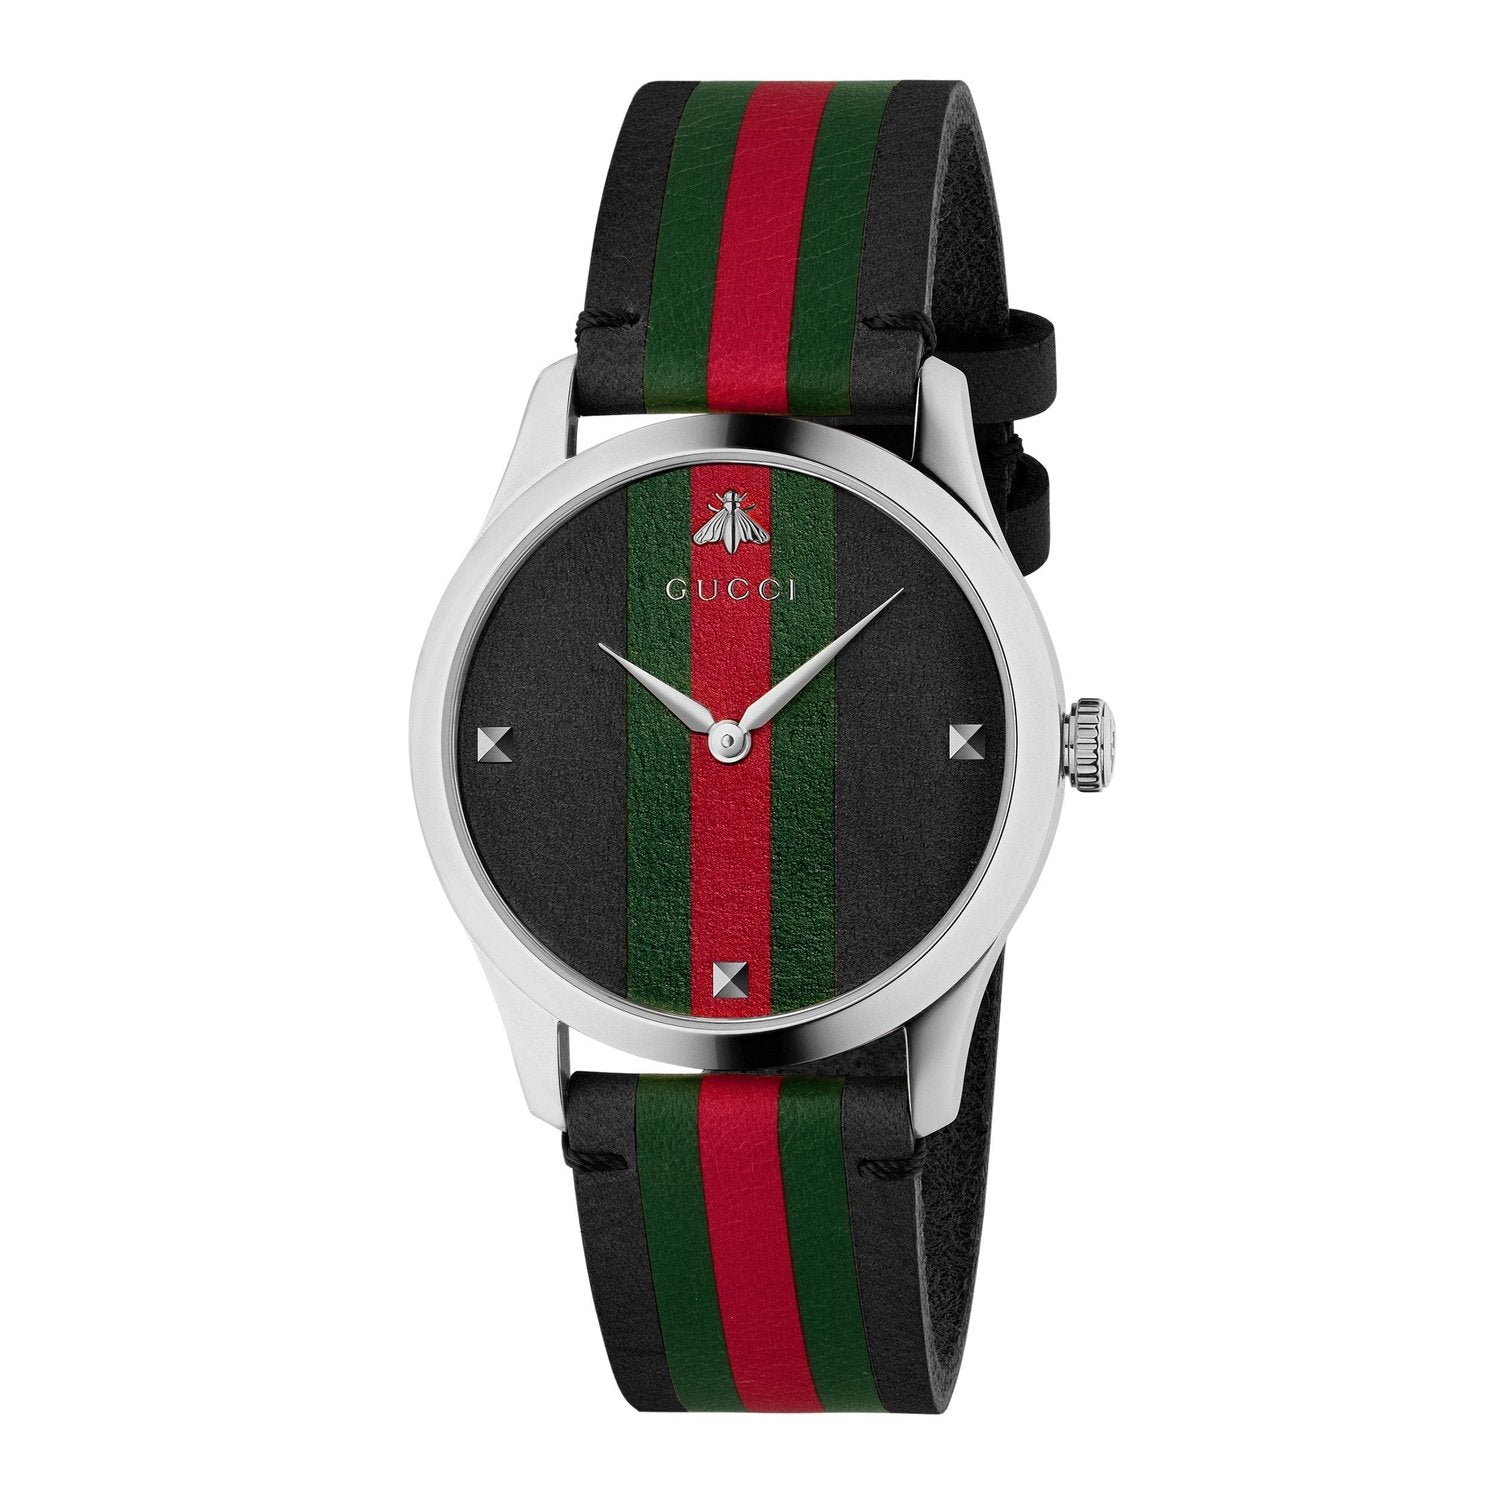 Gucci Watches For Men and Women | Shop Online Now – Page 2